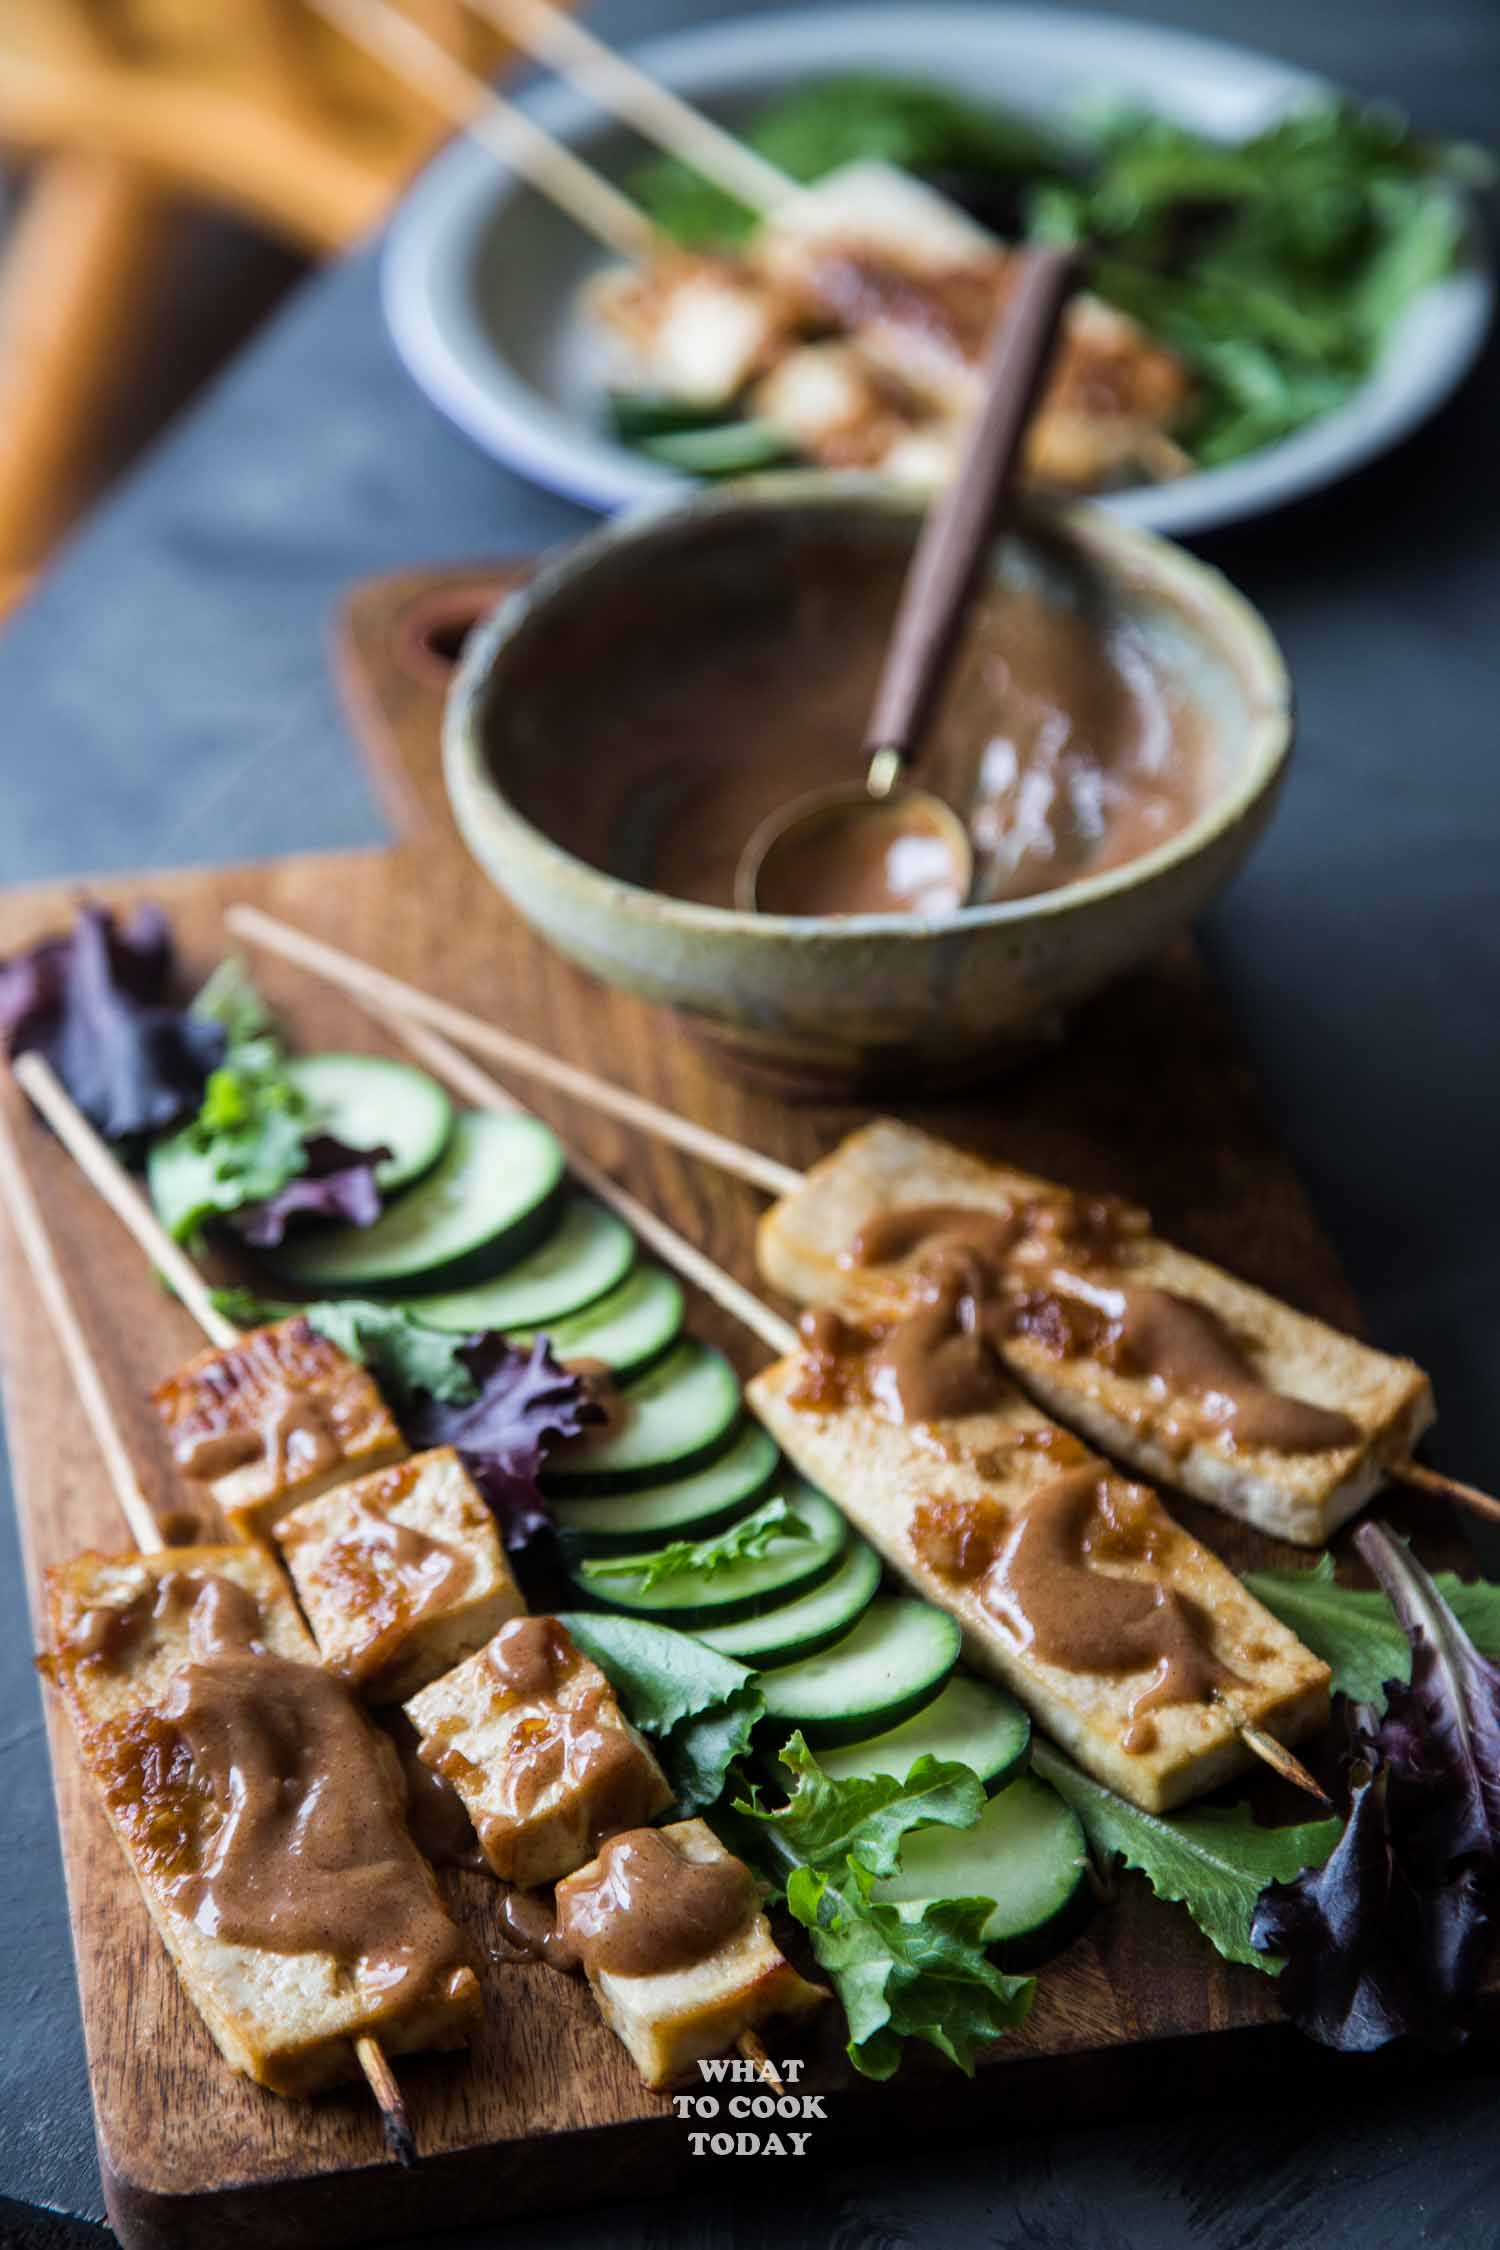 Tofu Satay with Almond Butter Sauce - Tofu is marinated in aromatic spices and serve with super easy, tasty, and creamy almond butter sauce. You will not think of tofu the same way again #ad #StartAHealthyRelationship